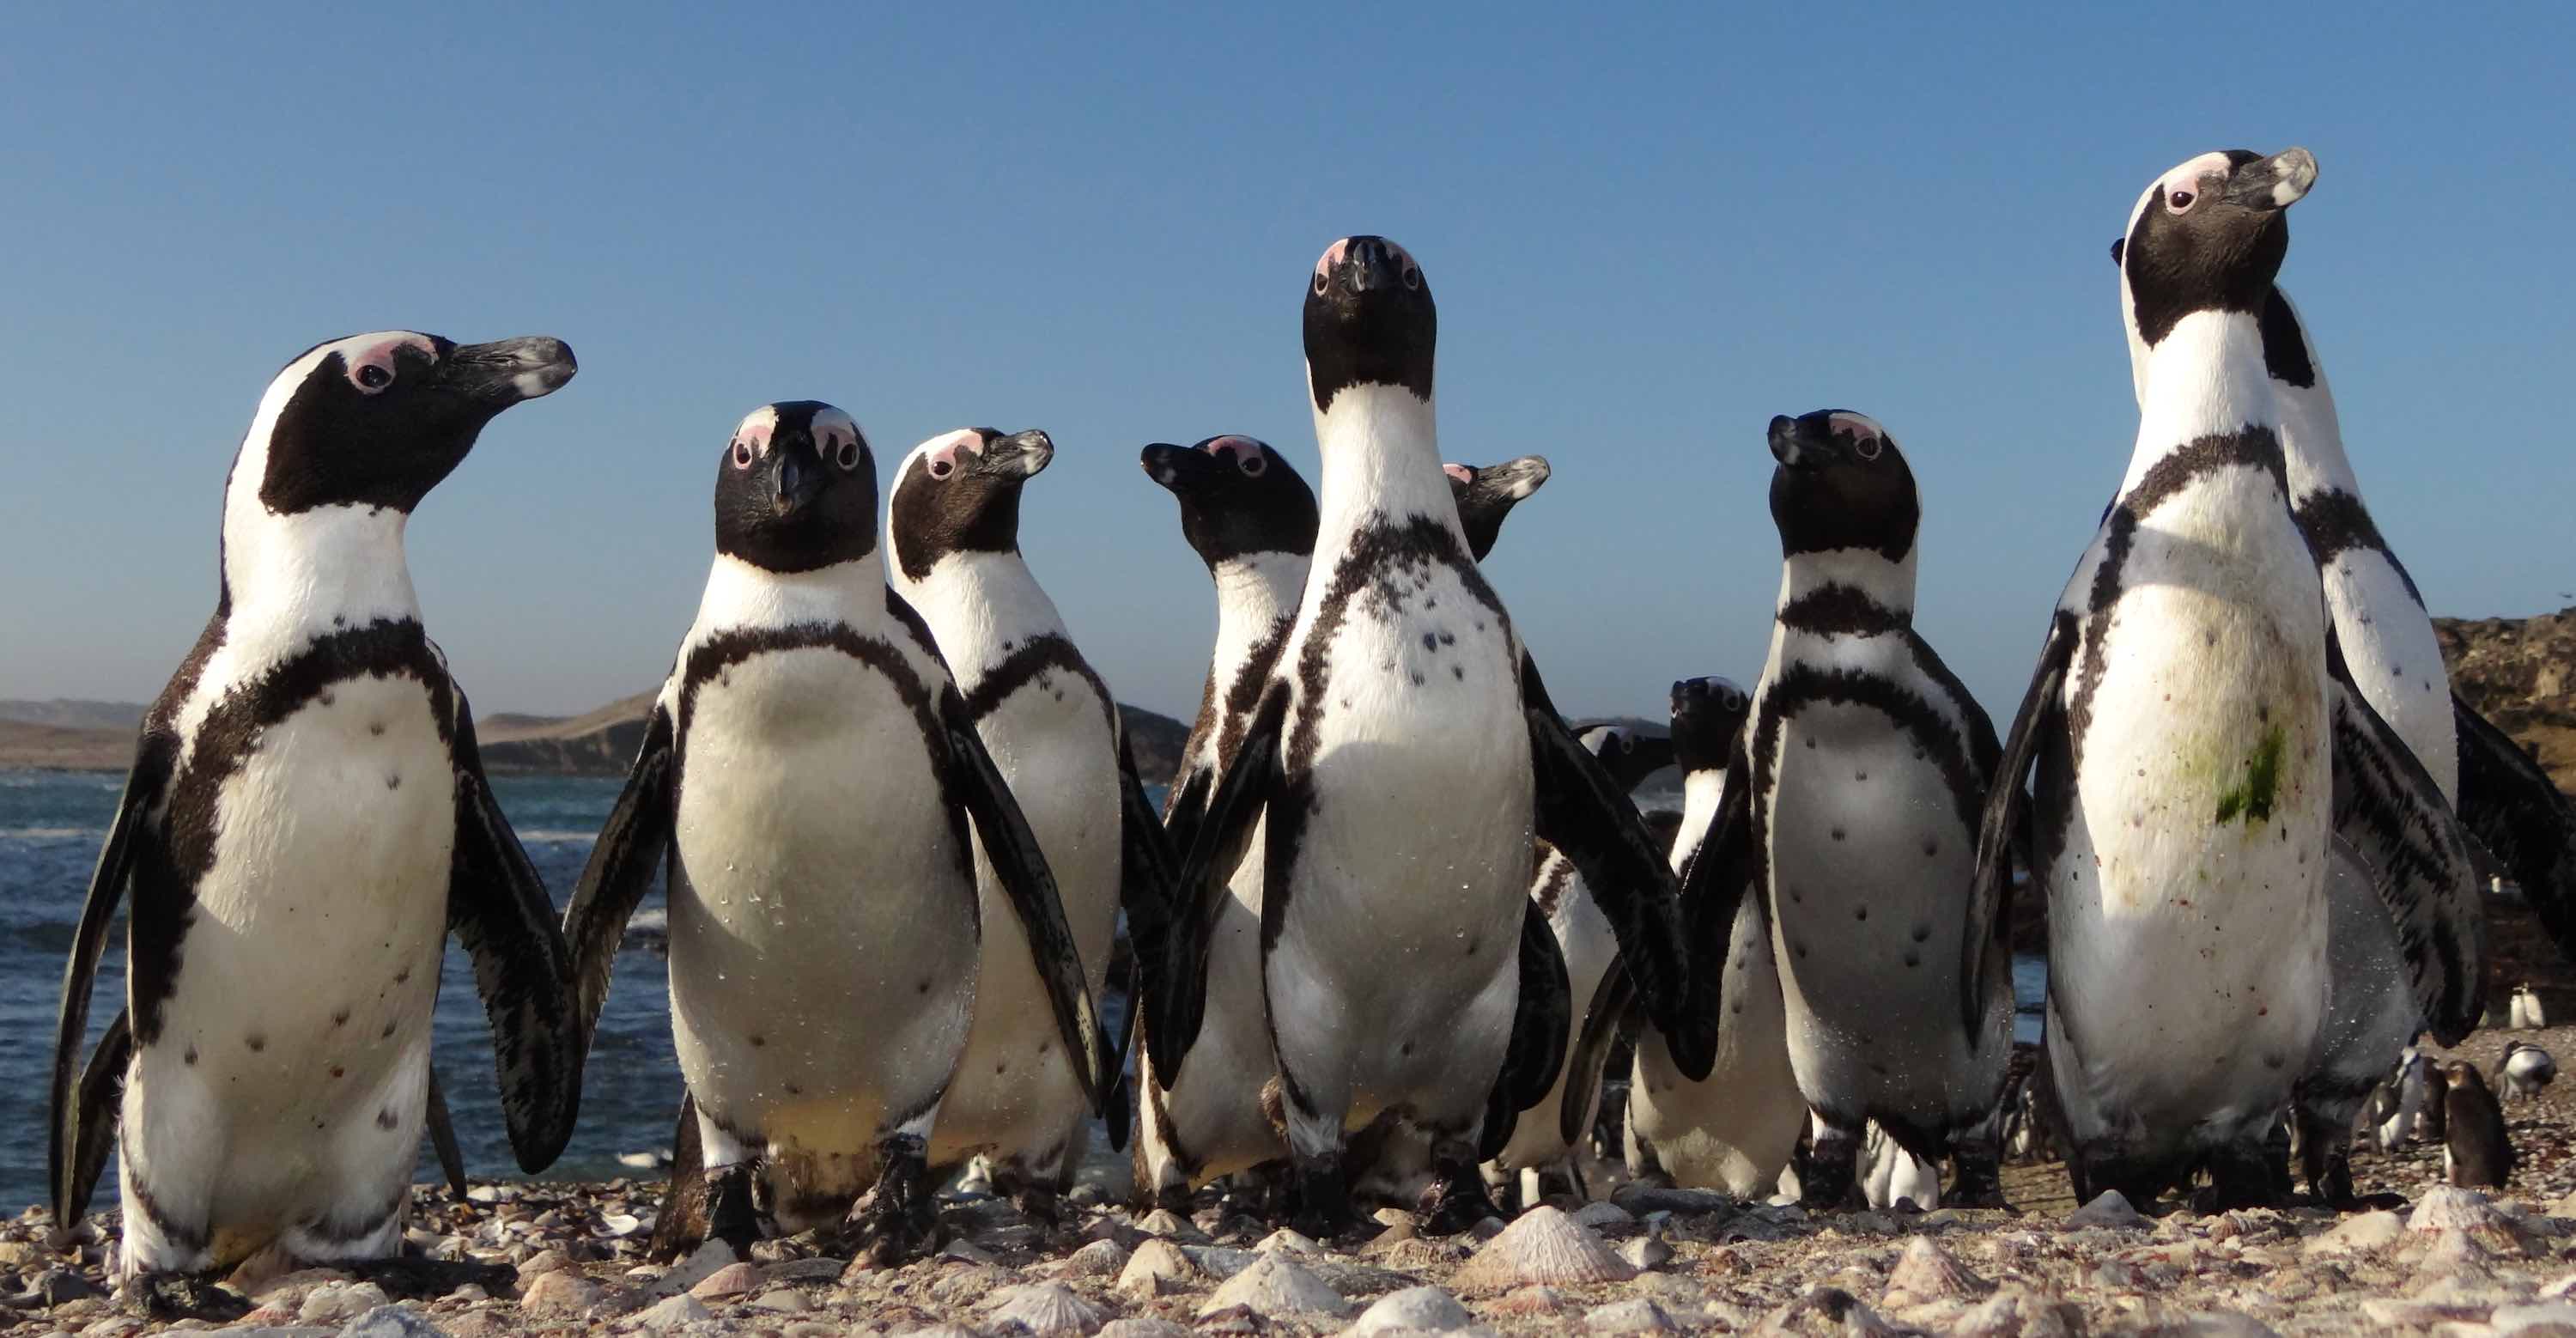 A group of eleven African penguins standing on rocks.